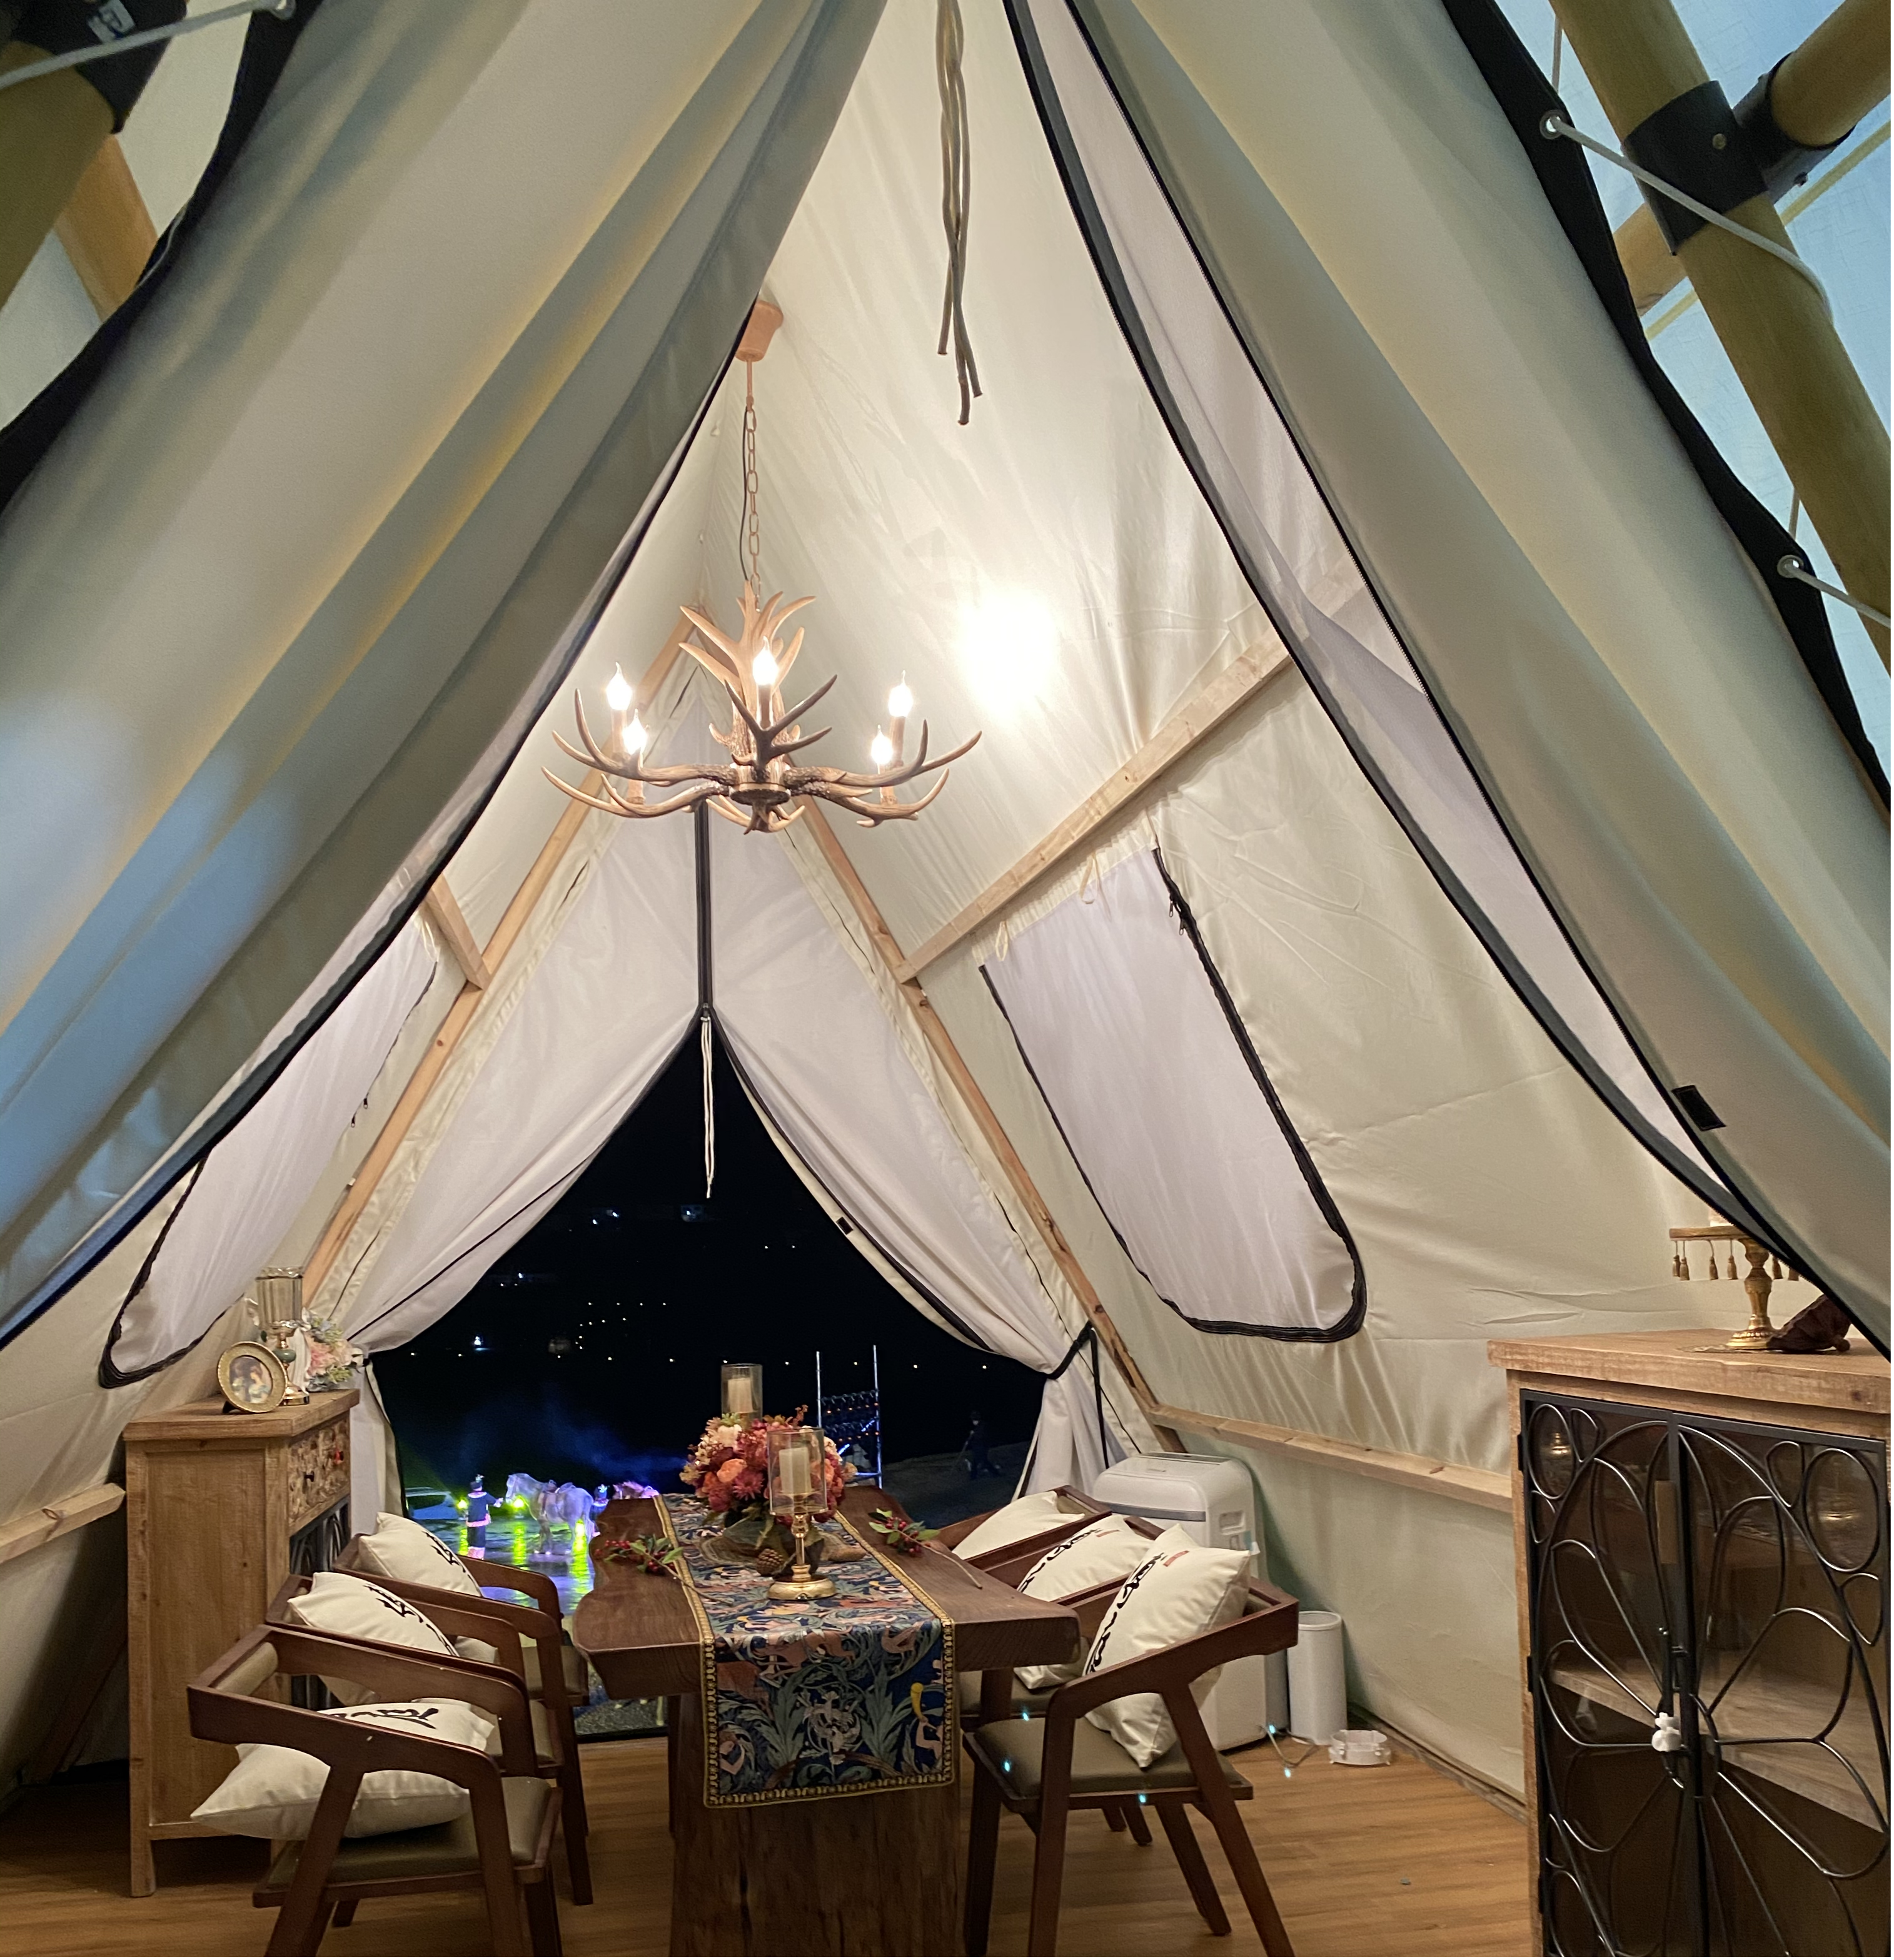 Tipi tent wood pole glamping safari tent luxury outdoor party wedding tent (2)(1)